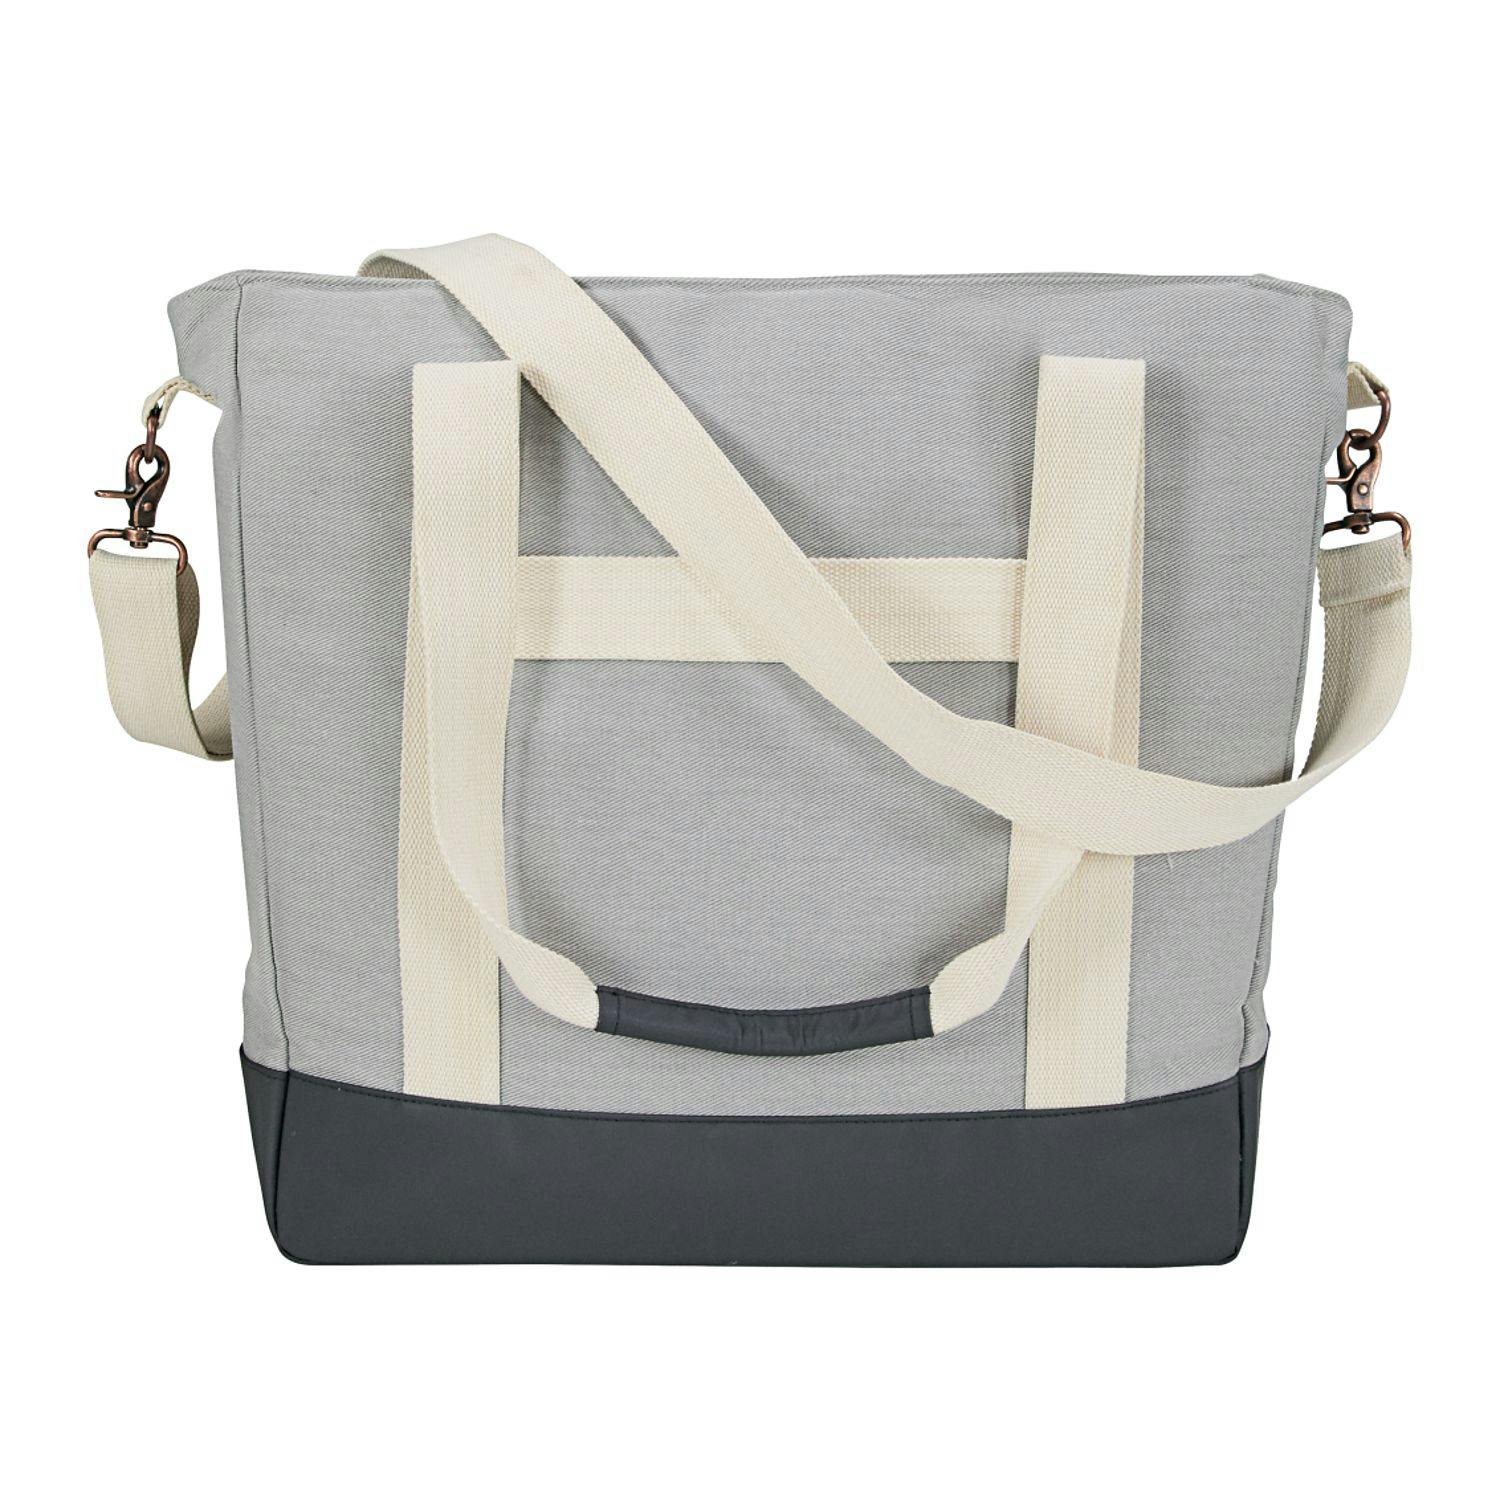 Cutter & Buck® Cotton Computer Tote - additional Image 1